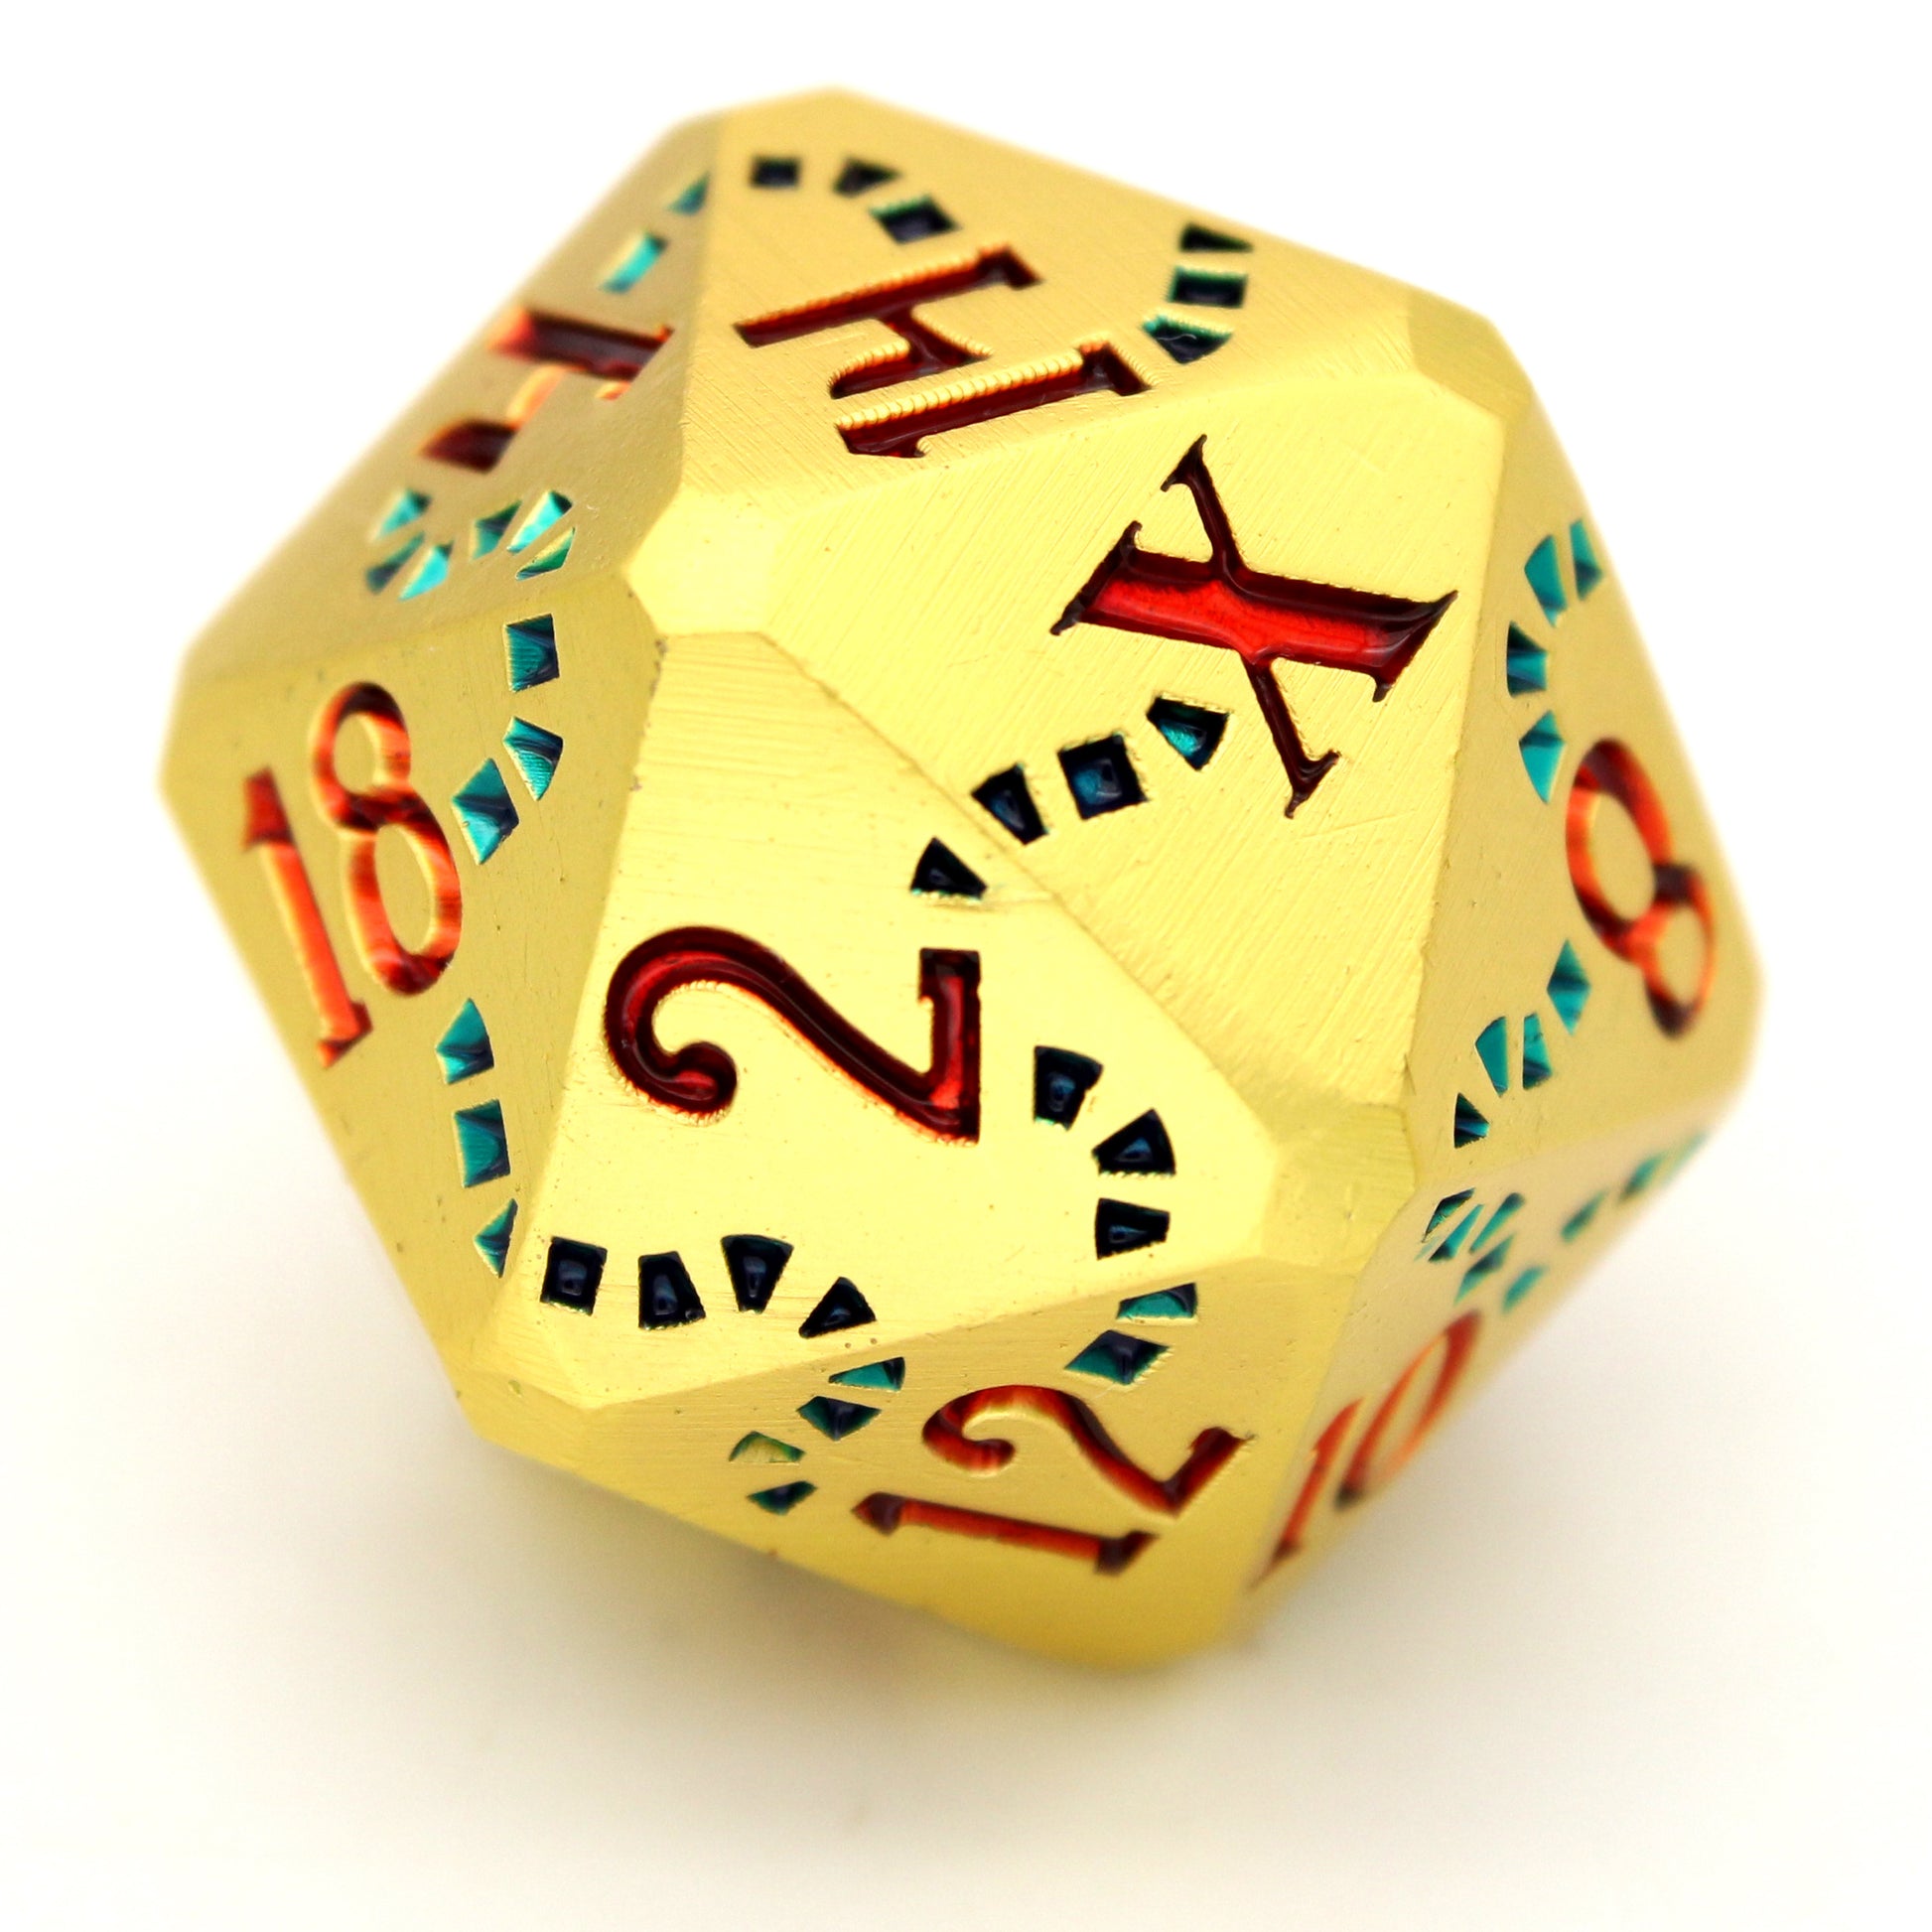 Queen Anne's Revenge is a Dice Envy Exclusive 8-piece set of gold metal dice with a treasure map engraving inked in blue and red. It is part of the Pirate Dice collection.